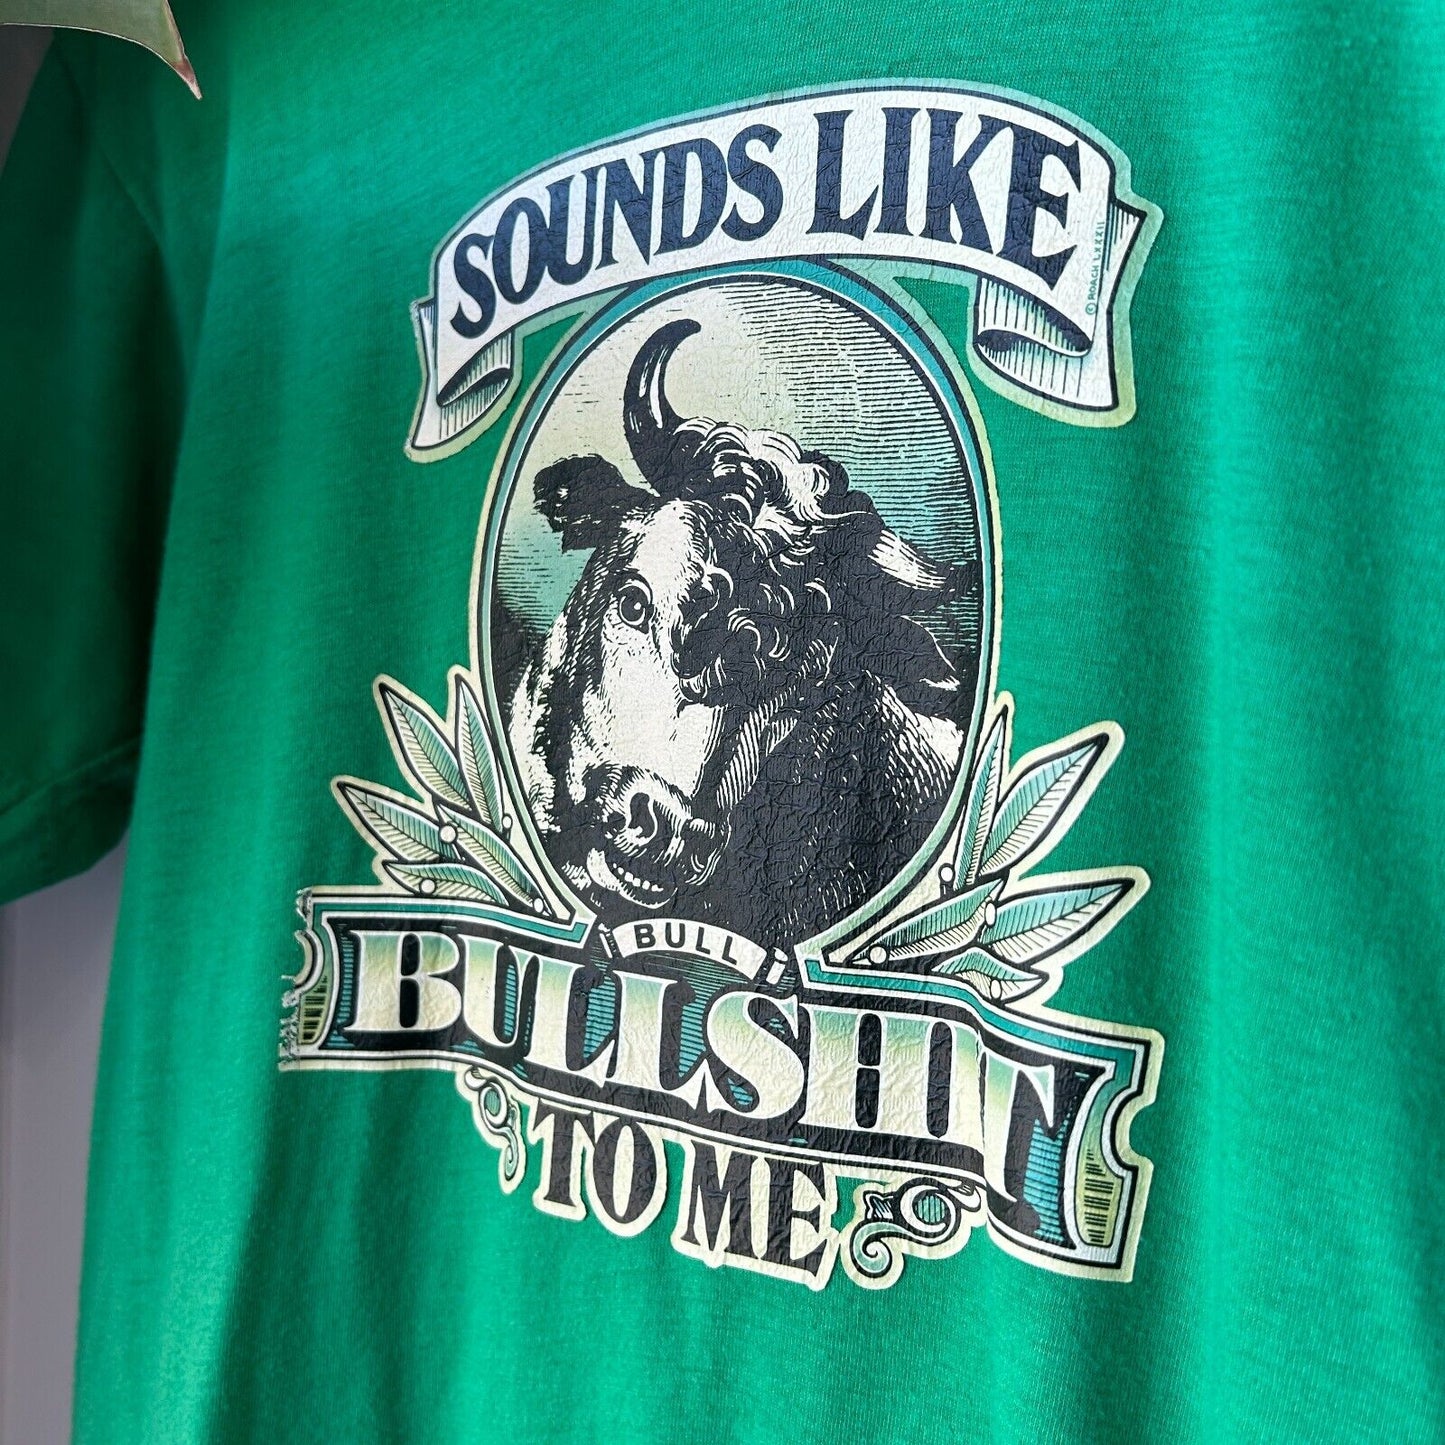 VINTAGE 80s | Sounds Like Bull S*** To Me T-Shirt sz S